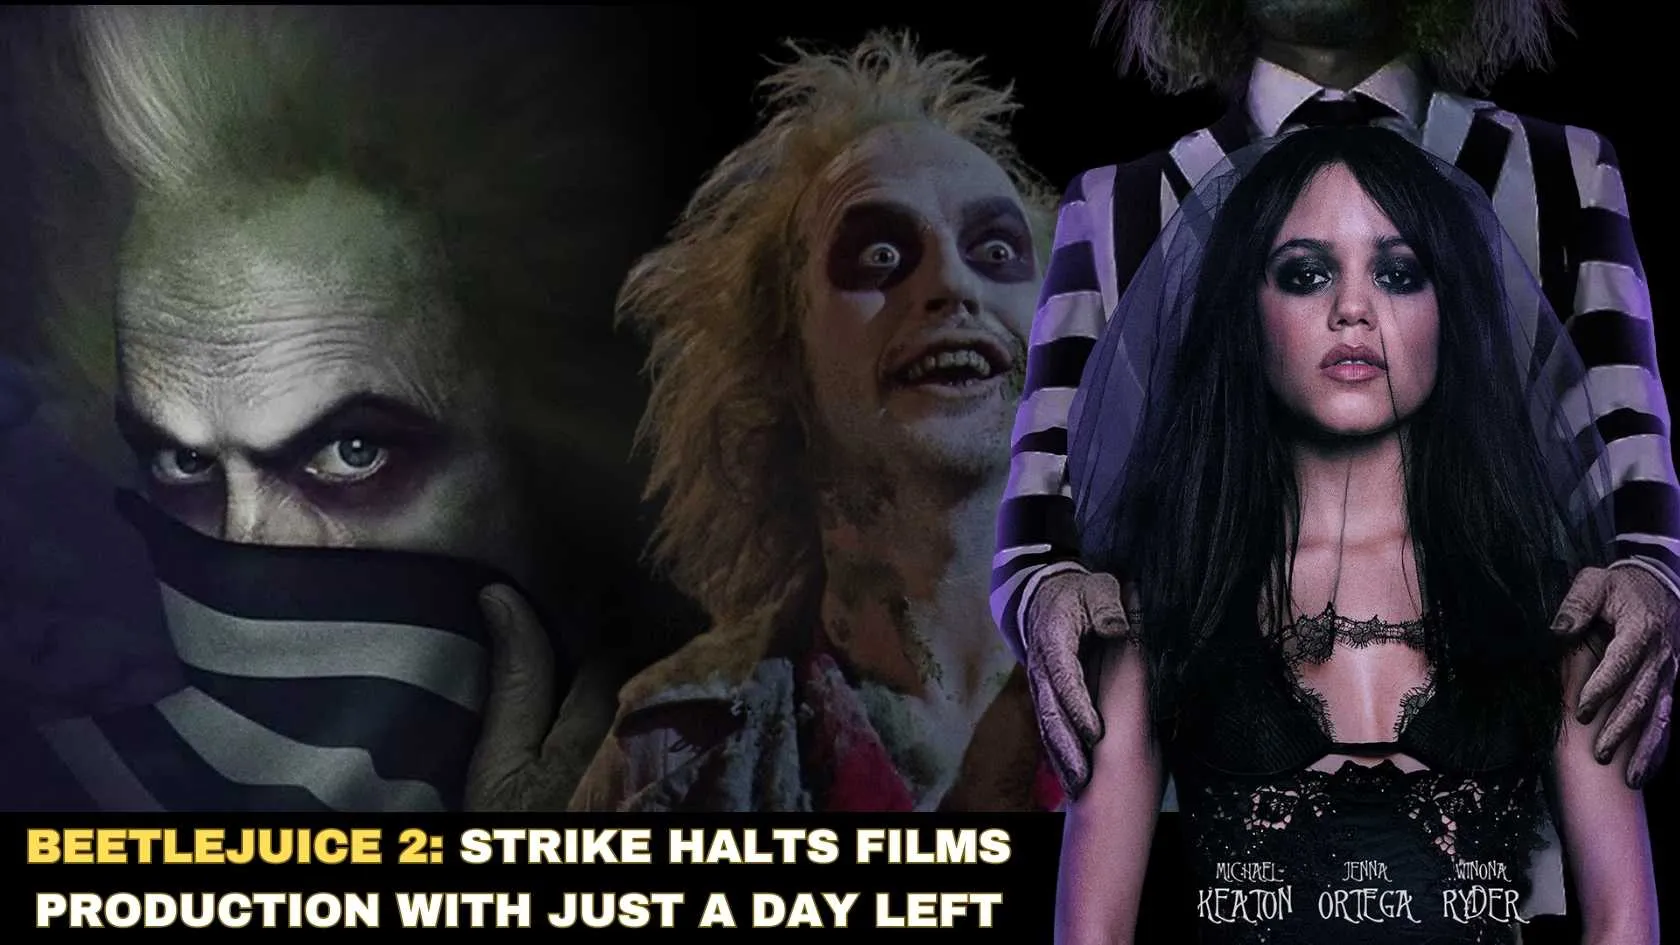 Beetlejuice 2 Strike Halts Films Production with Just a Day Left